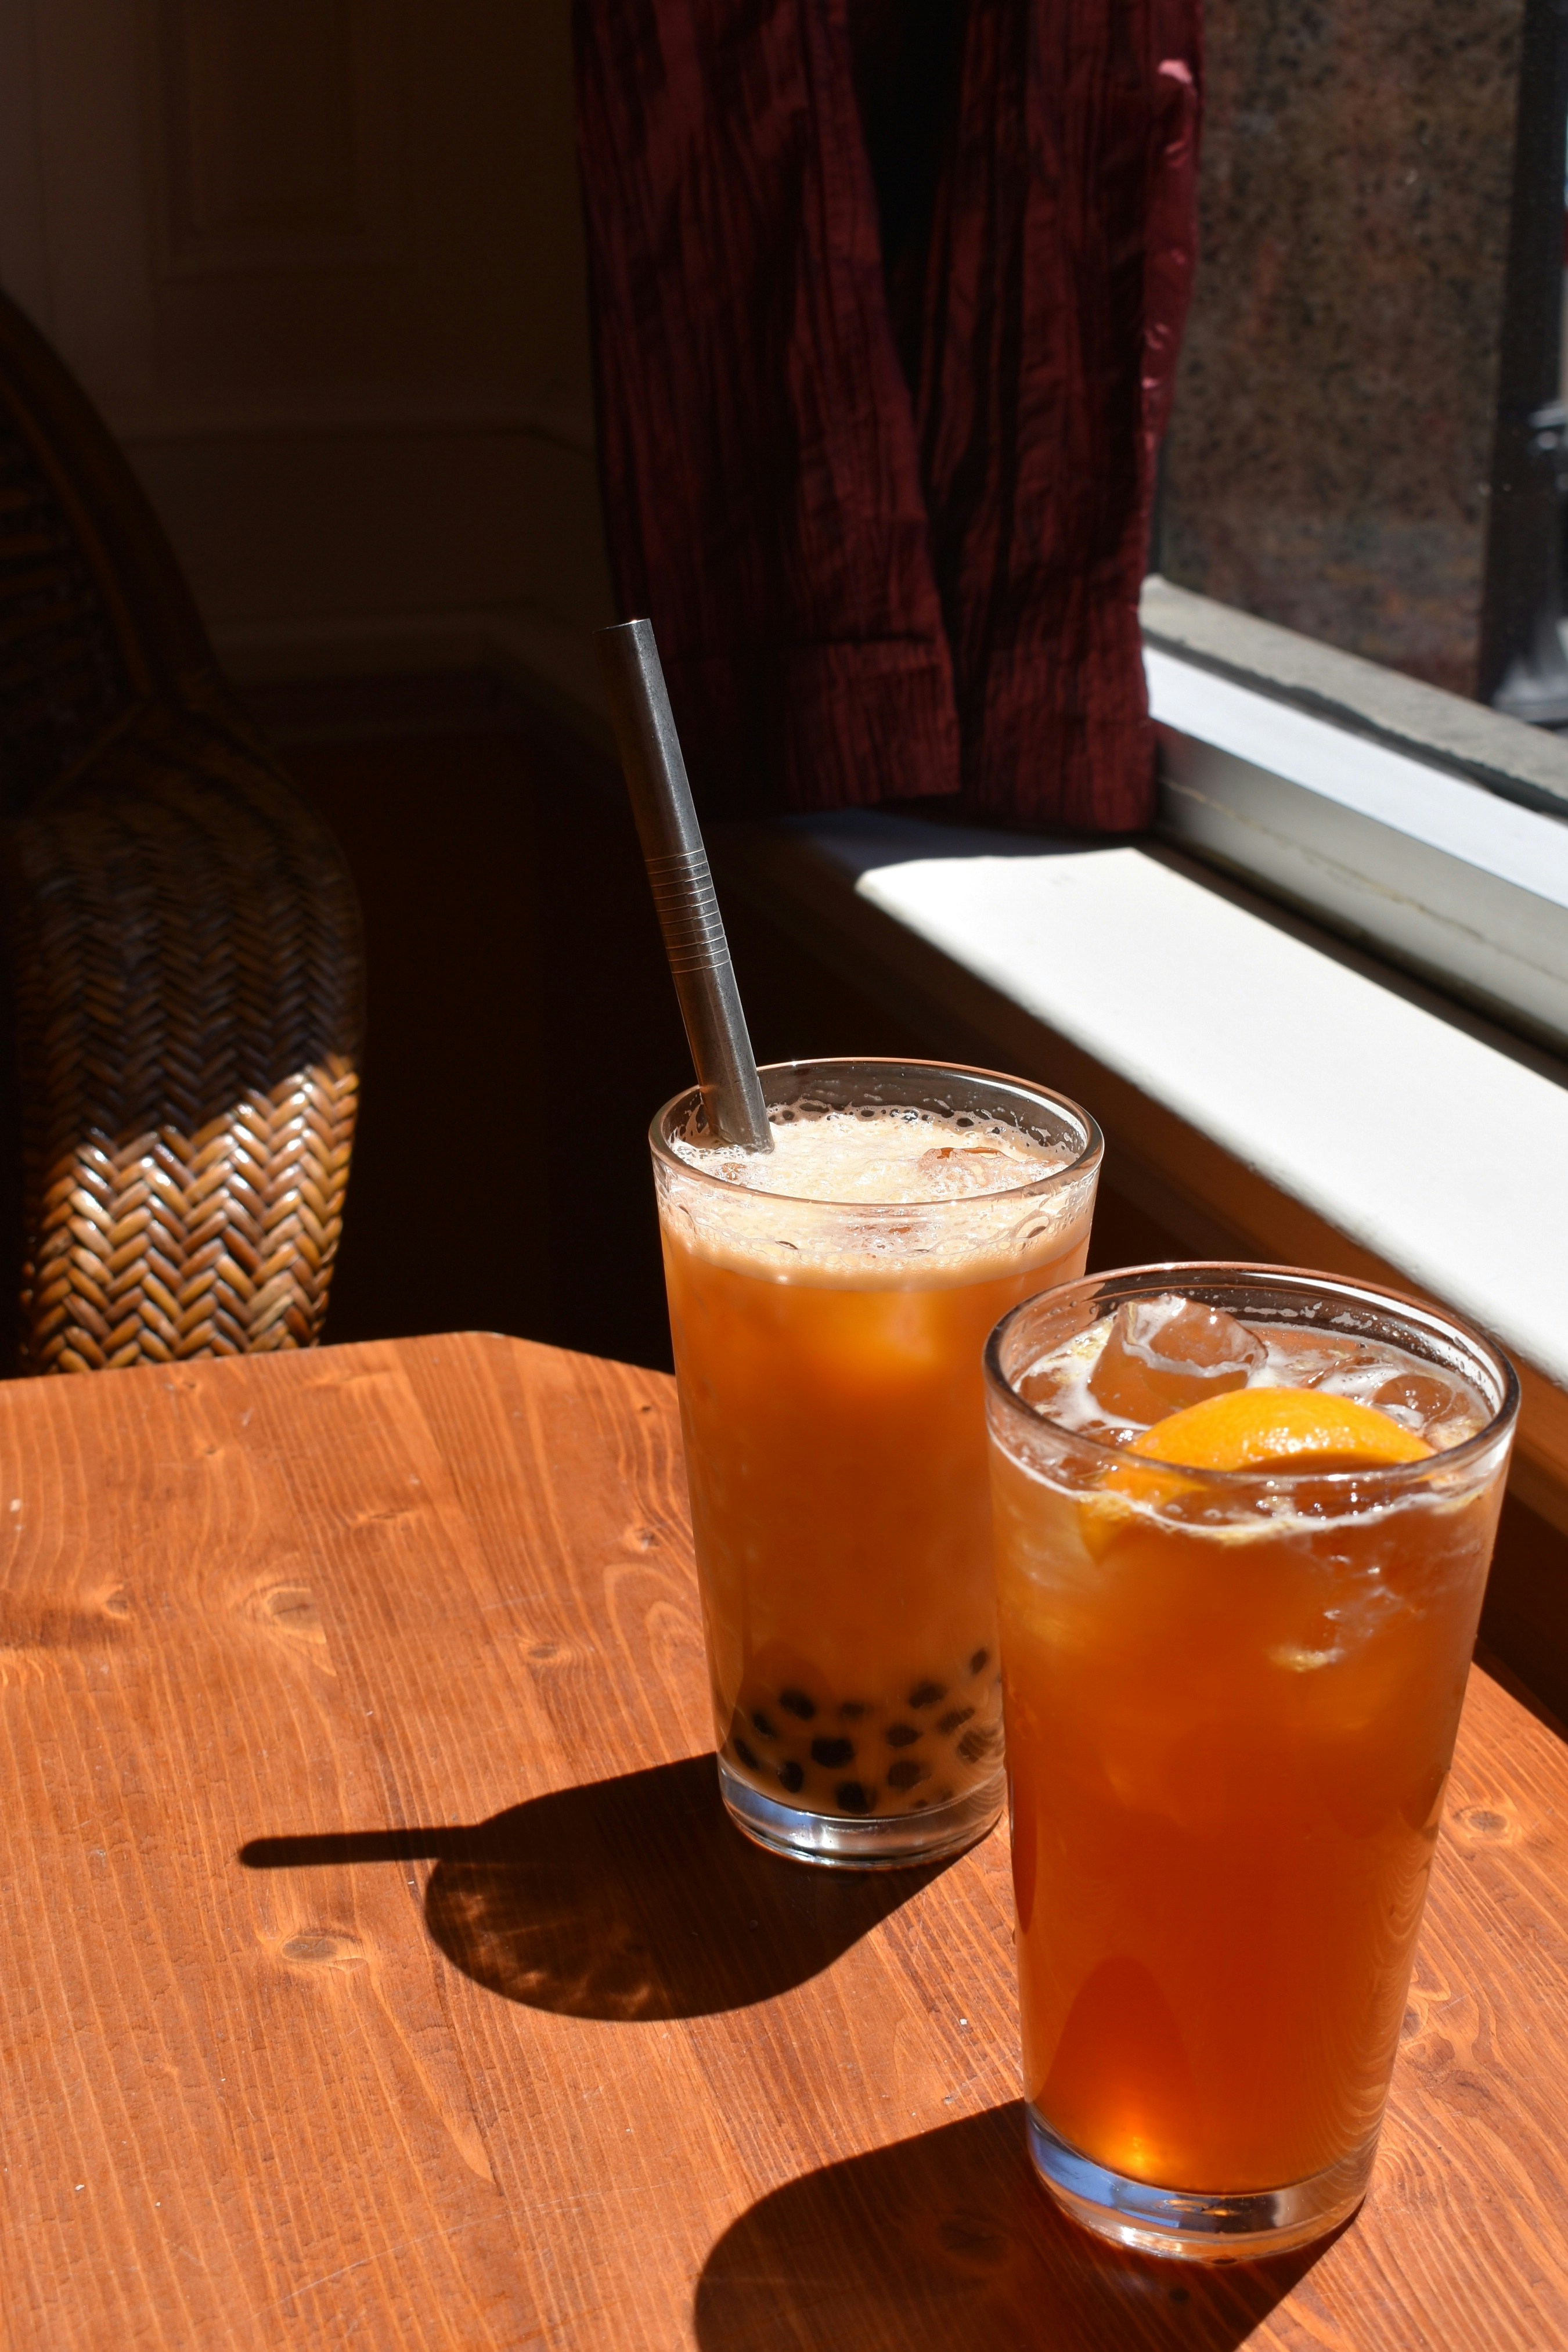 Bubble Tea For Adults: Adding A Splash Of Gin To The Refreshing Drink